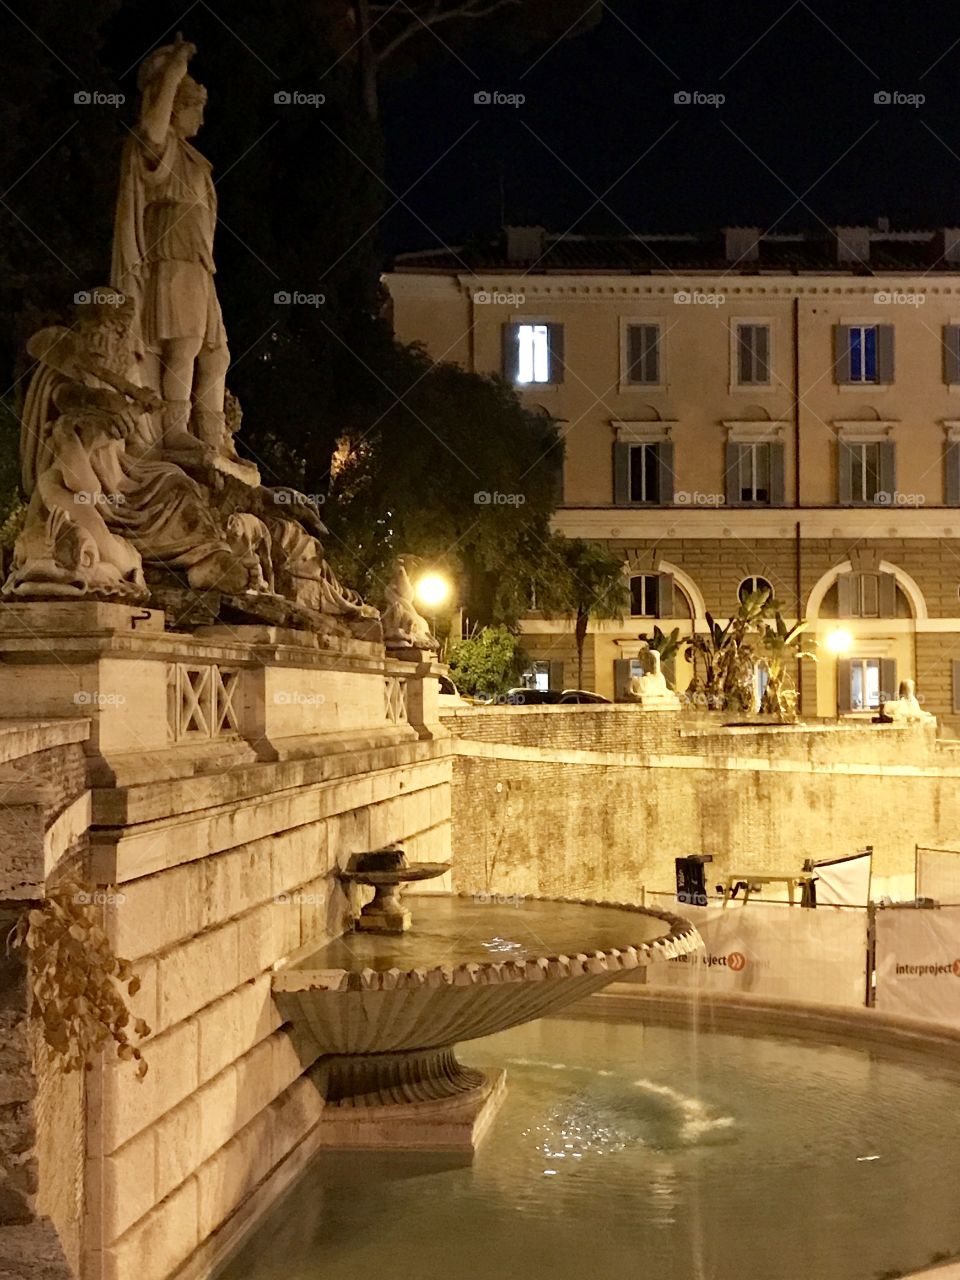 In Rome the myths and legends flow like the water, here in Piazza del Popolo